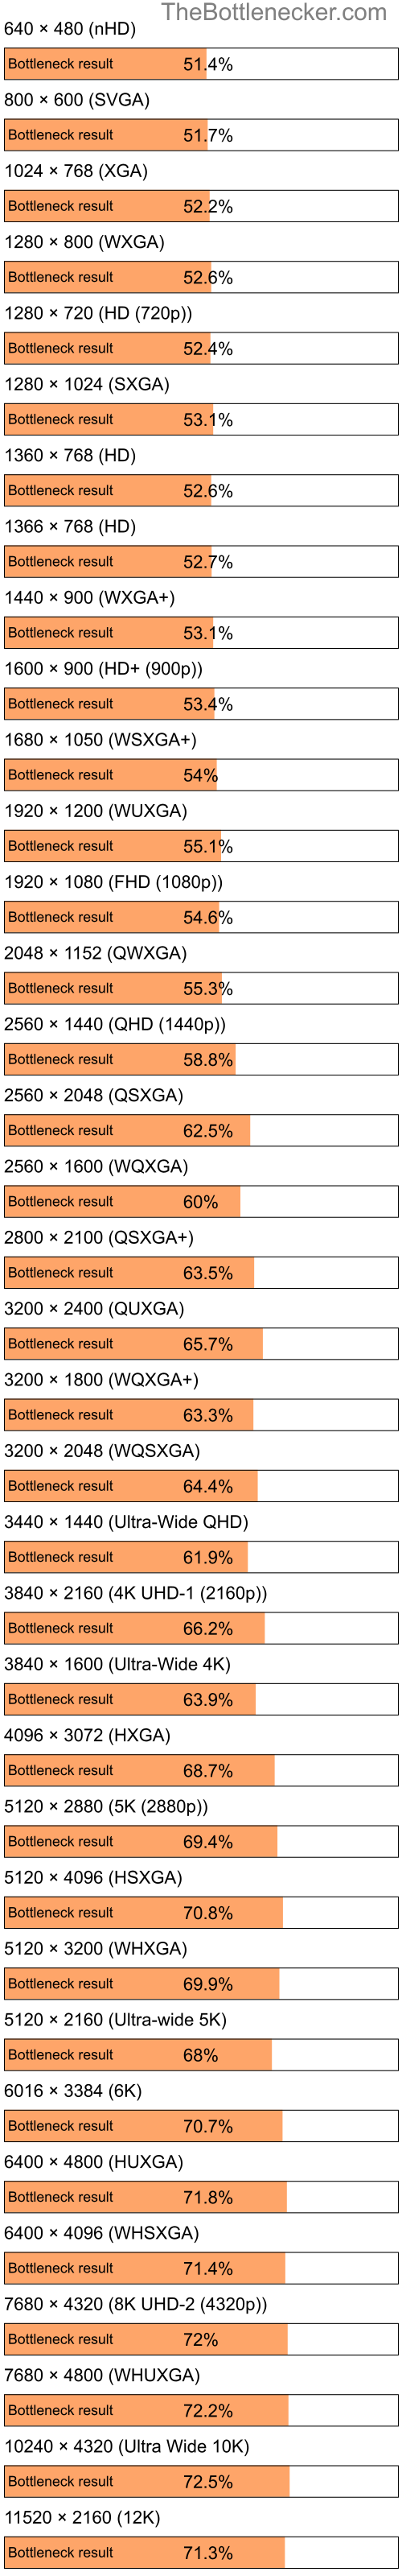 Bottleneck results by resolution for Intel Pentium 4 and NVIDIA GeForce 9500M GS in General Tasks